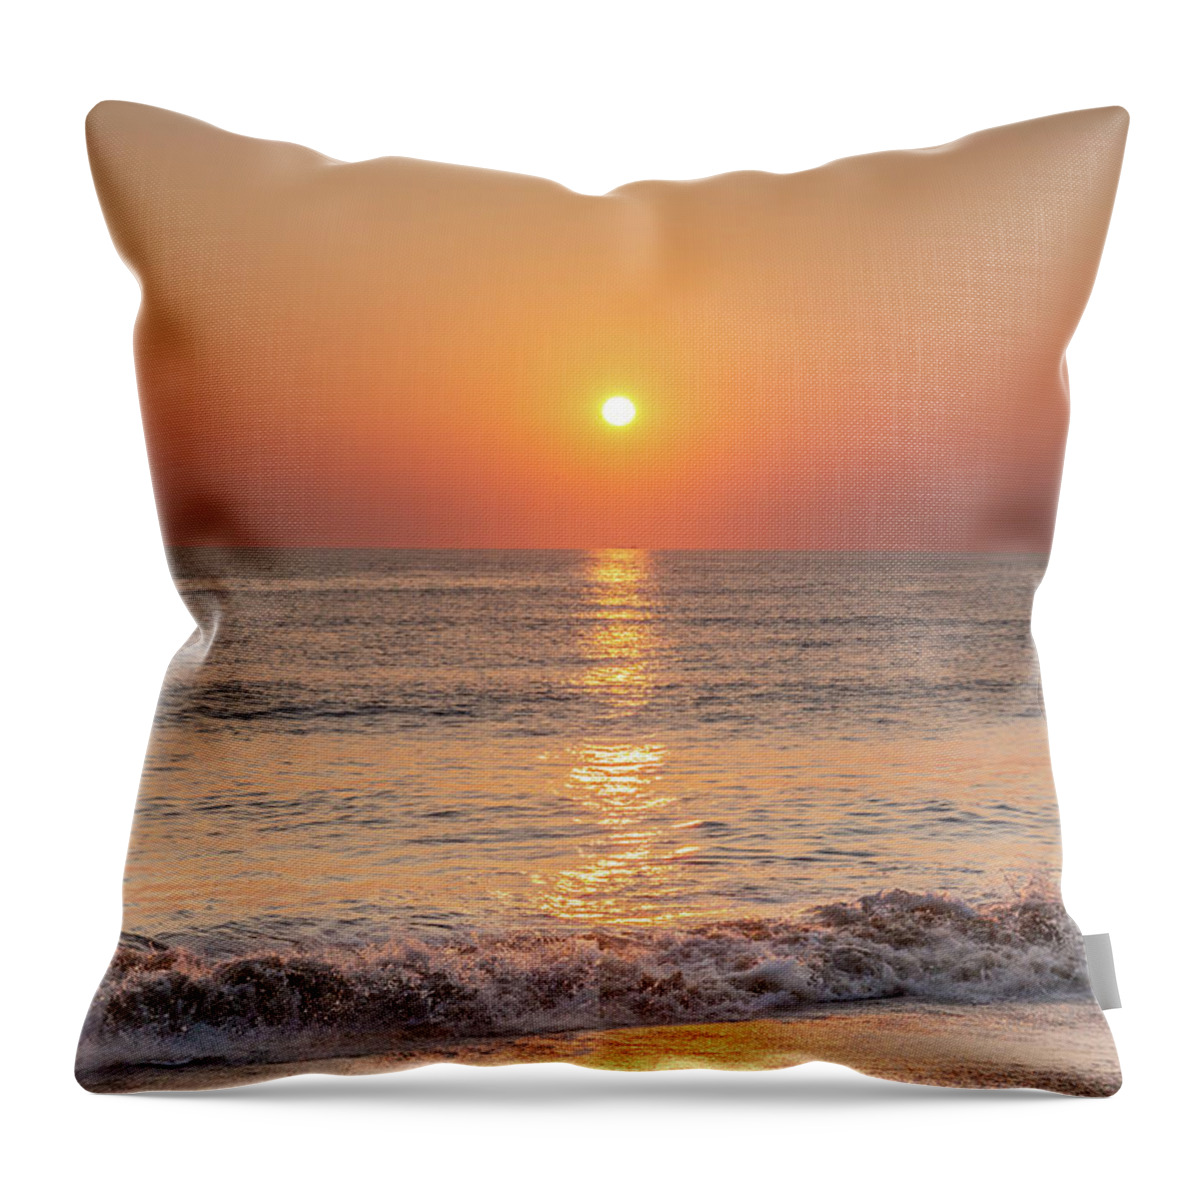 Sunrise Throw Pillow featuring the photograph Indian Summer Sunrise by Donna Twiford